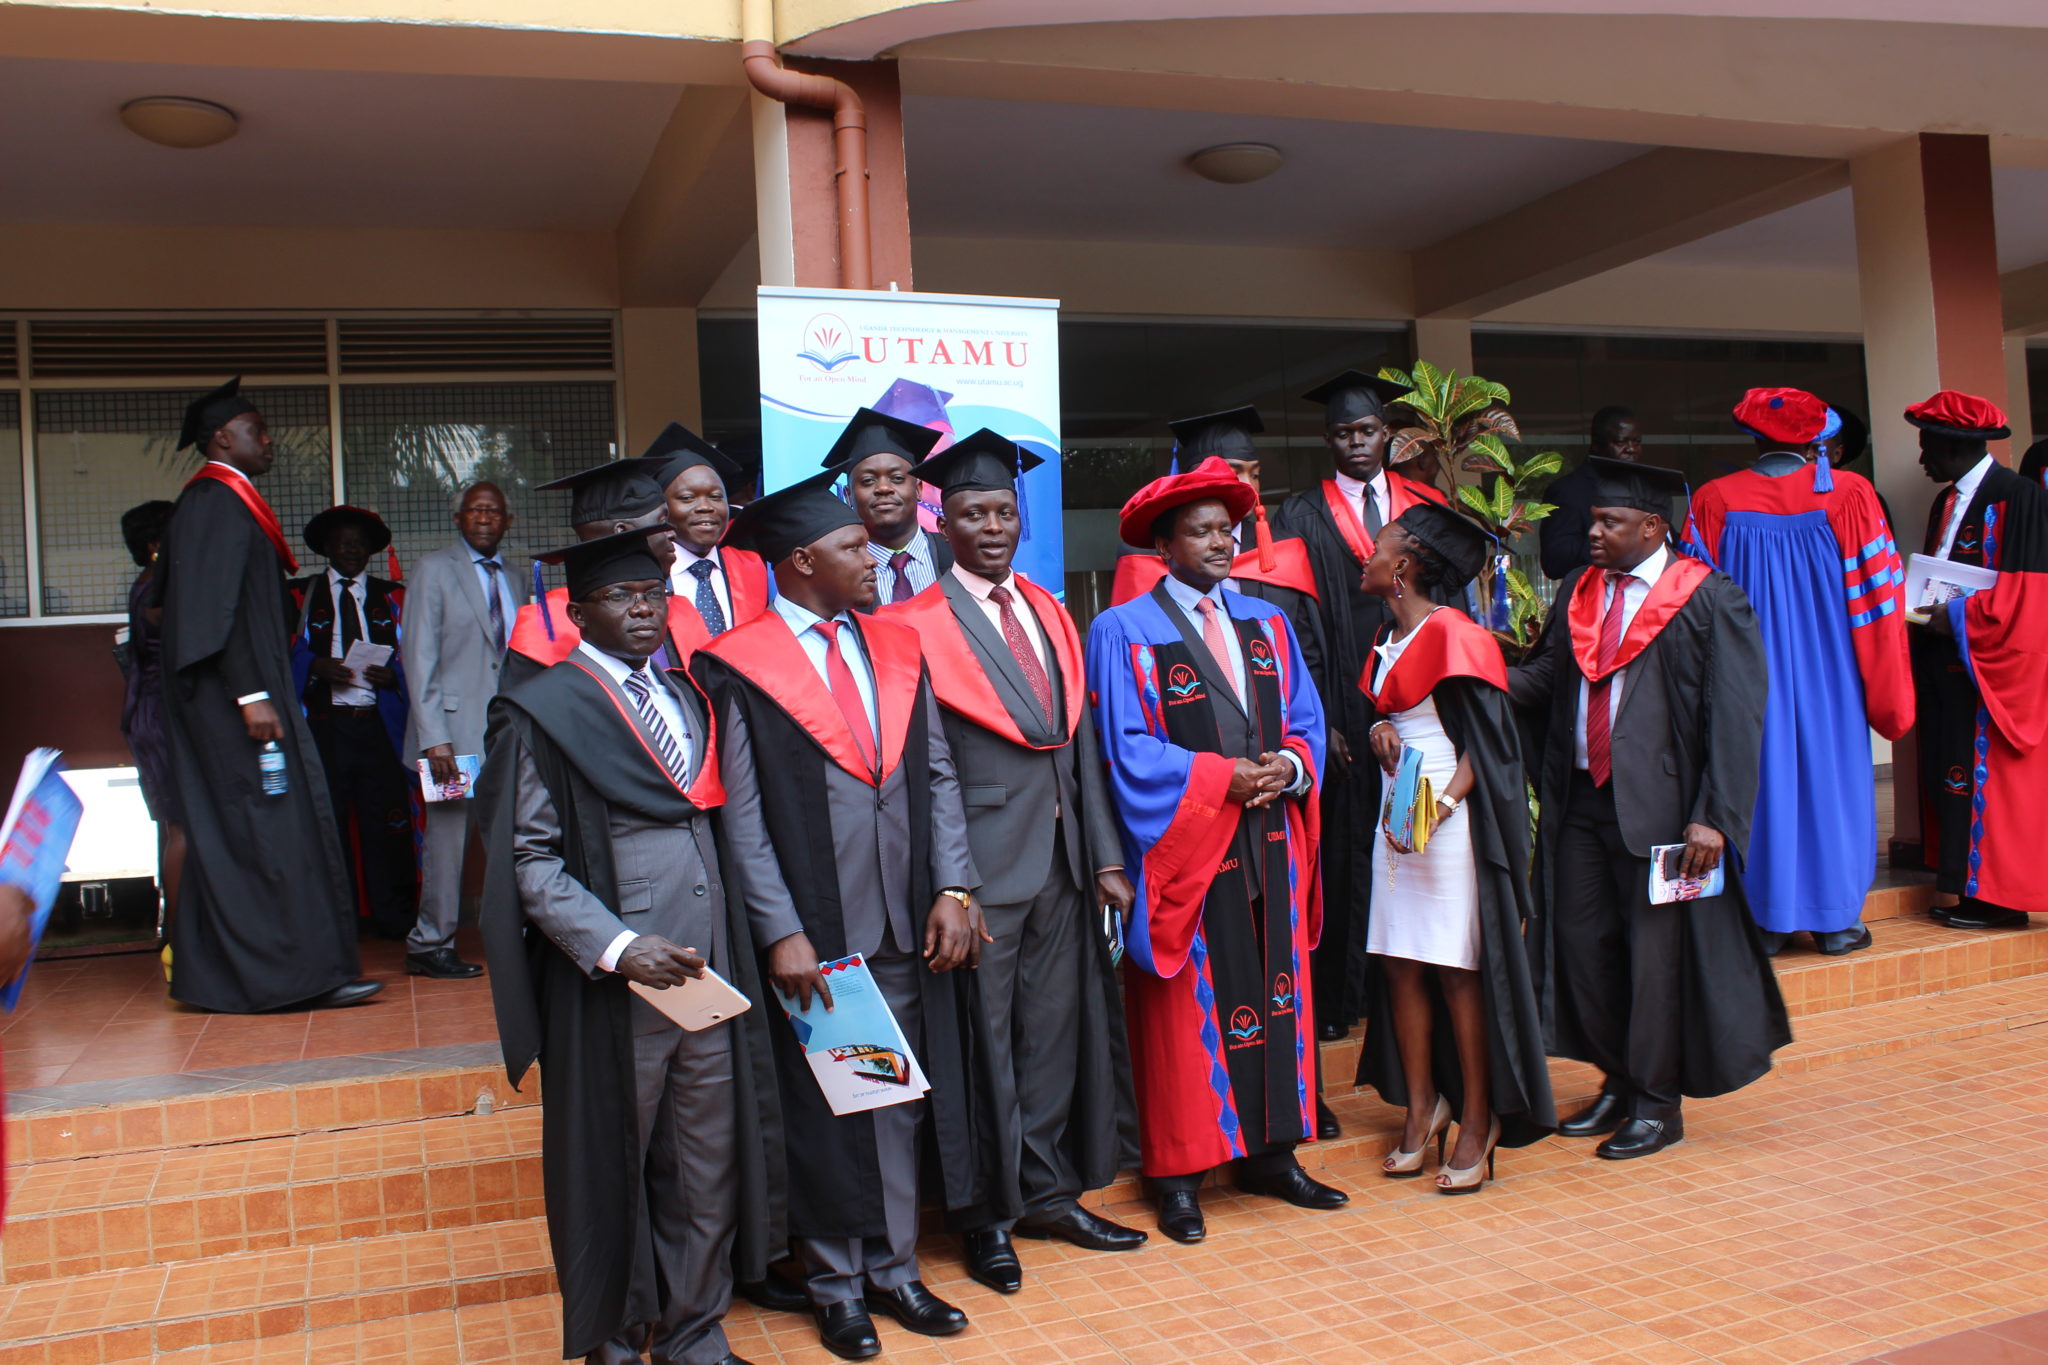 WE MADE IT: Chancellor Kalonzo Musyoka poses for a group photo with some of the graduates. Photo/Pius Enywaru.